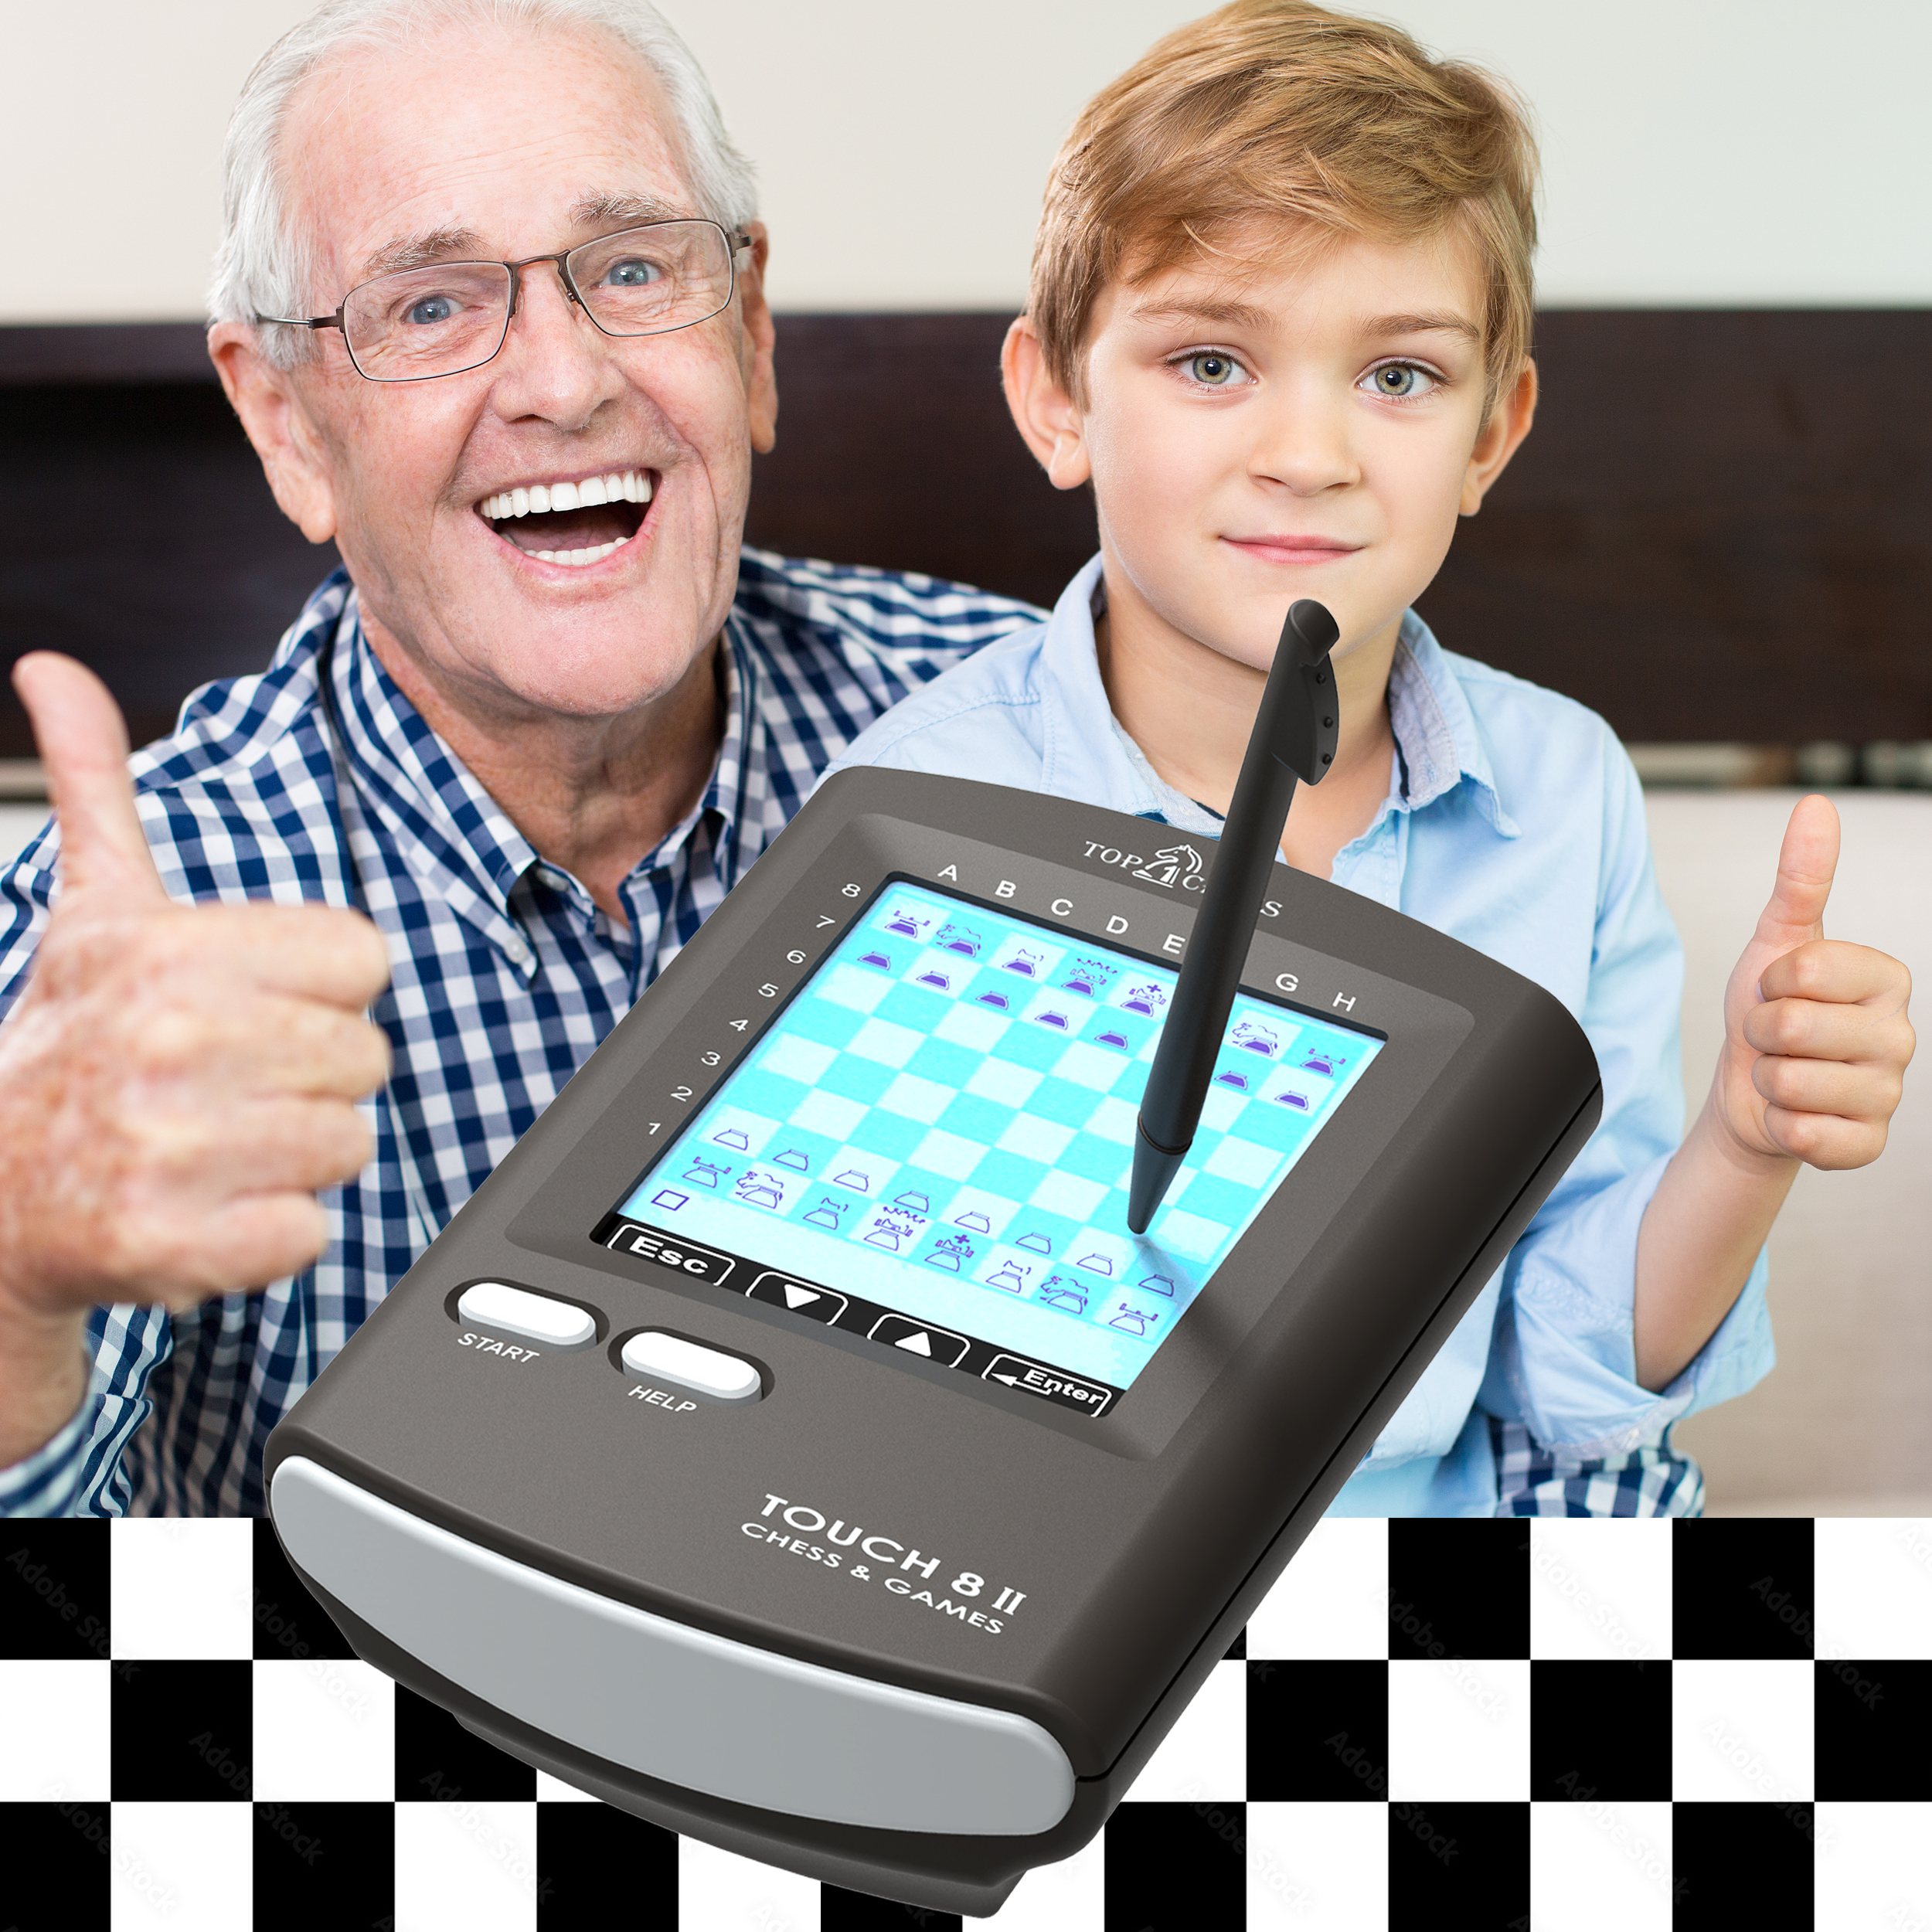 Top 1 Chess Touch Electronic Chess Game, Strategy Games Computer for Kids Improving Chess Skills, Portable Travel Chess Computer Set for Adults, Unique Chess Sets Pen with Large Display Gift - image 1 of 8